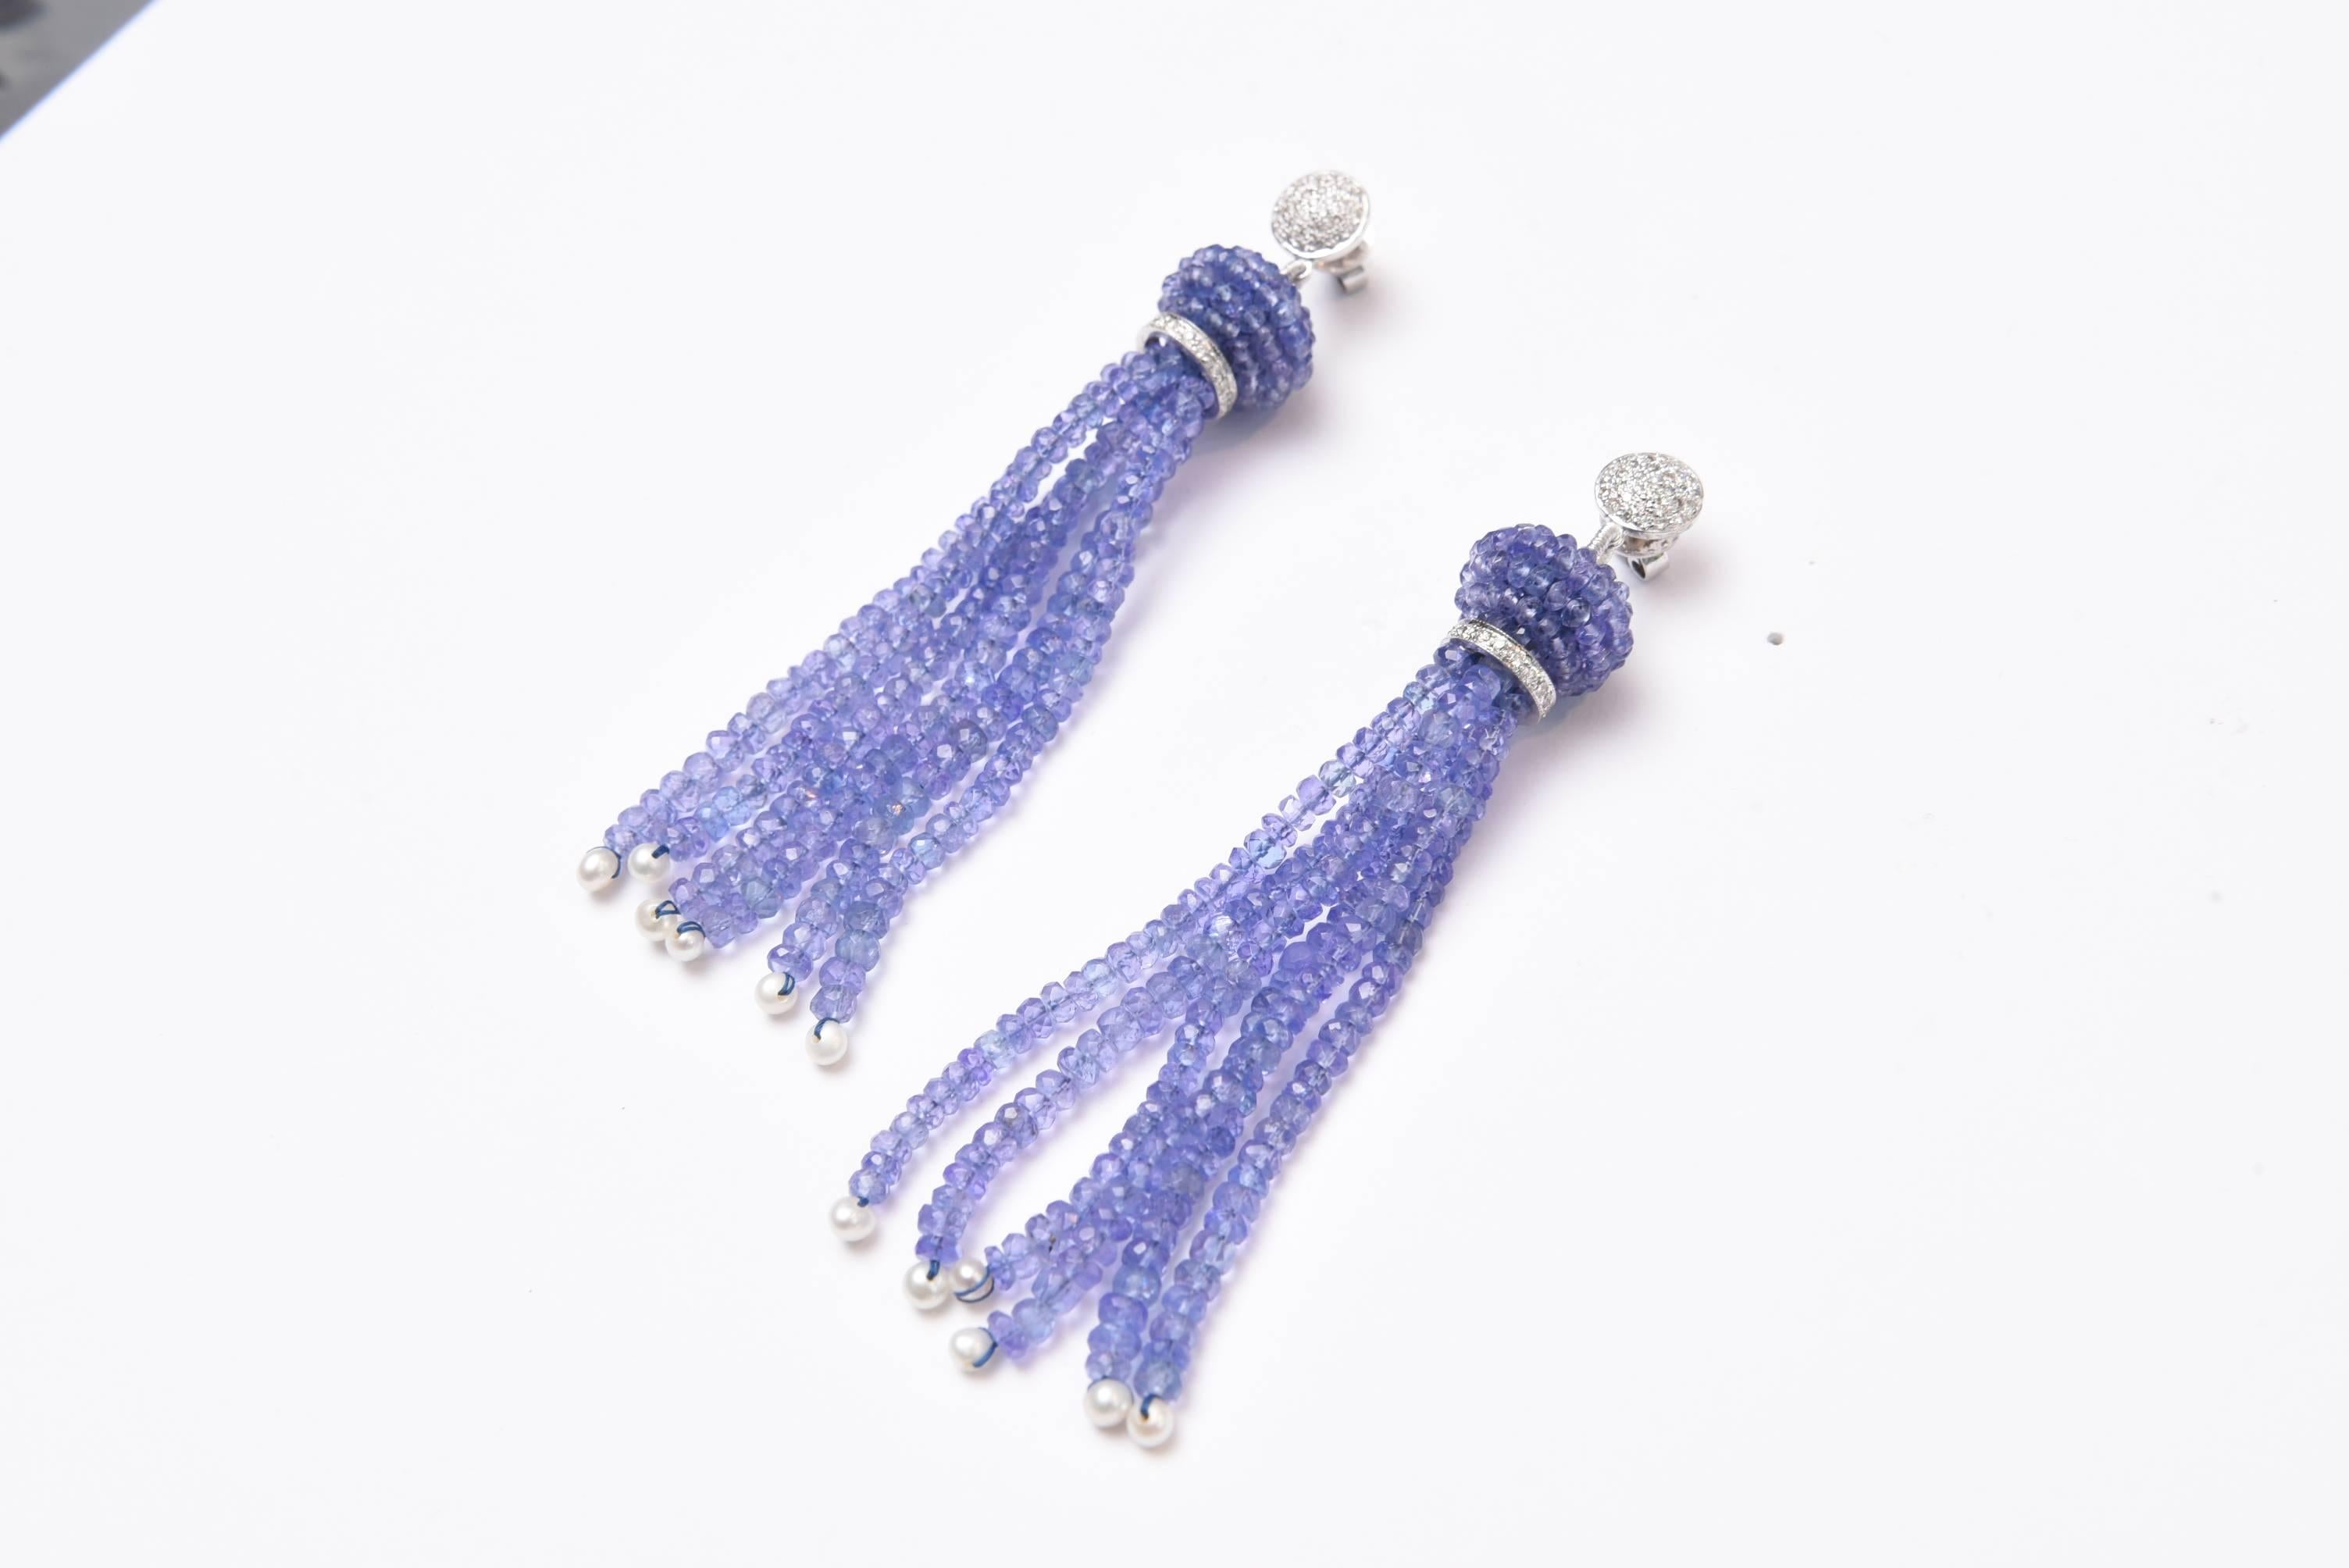 Lovely faceted tanzanite tassel earrings with seed pearls at the bottom, 18K gold diamond rondells and diamond earring studs, for pierced ears.  